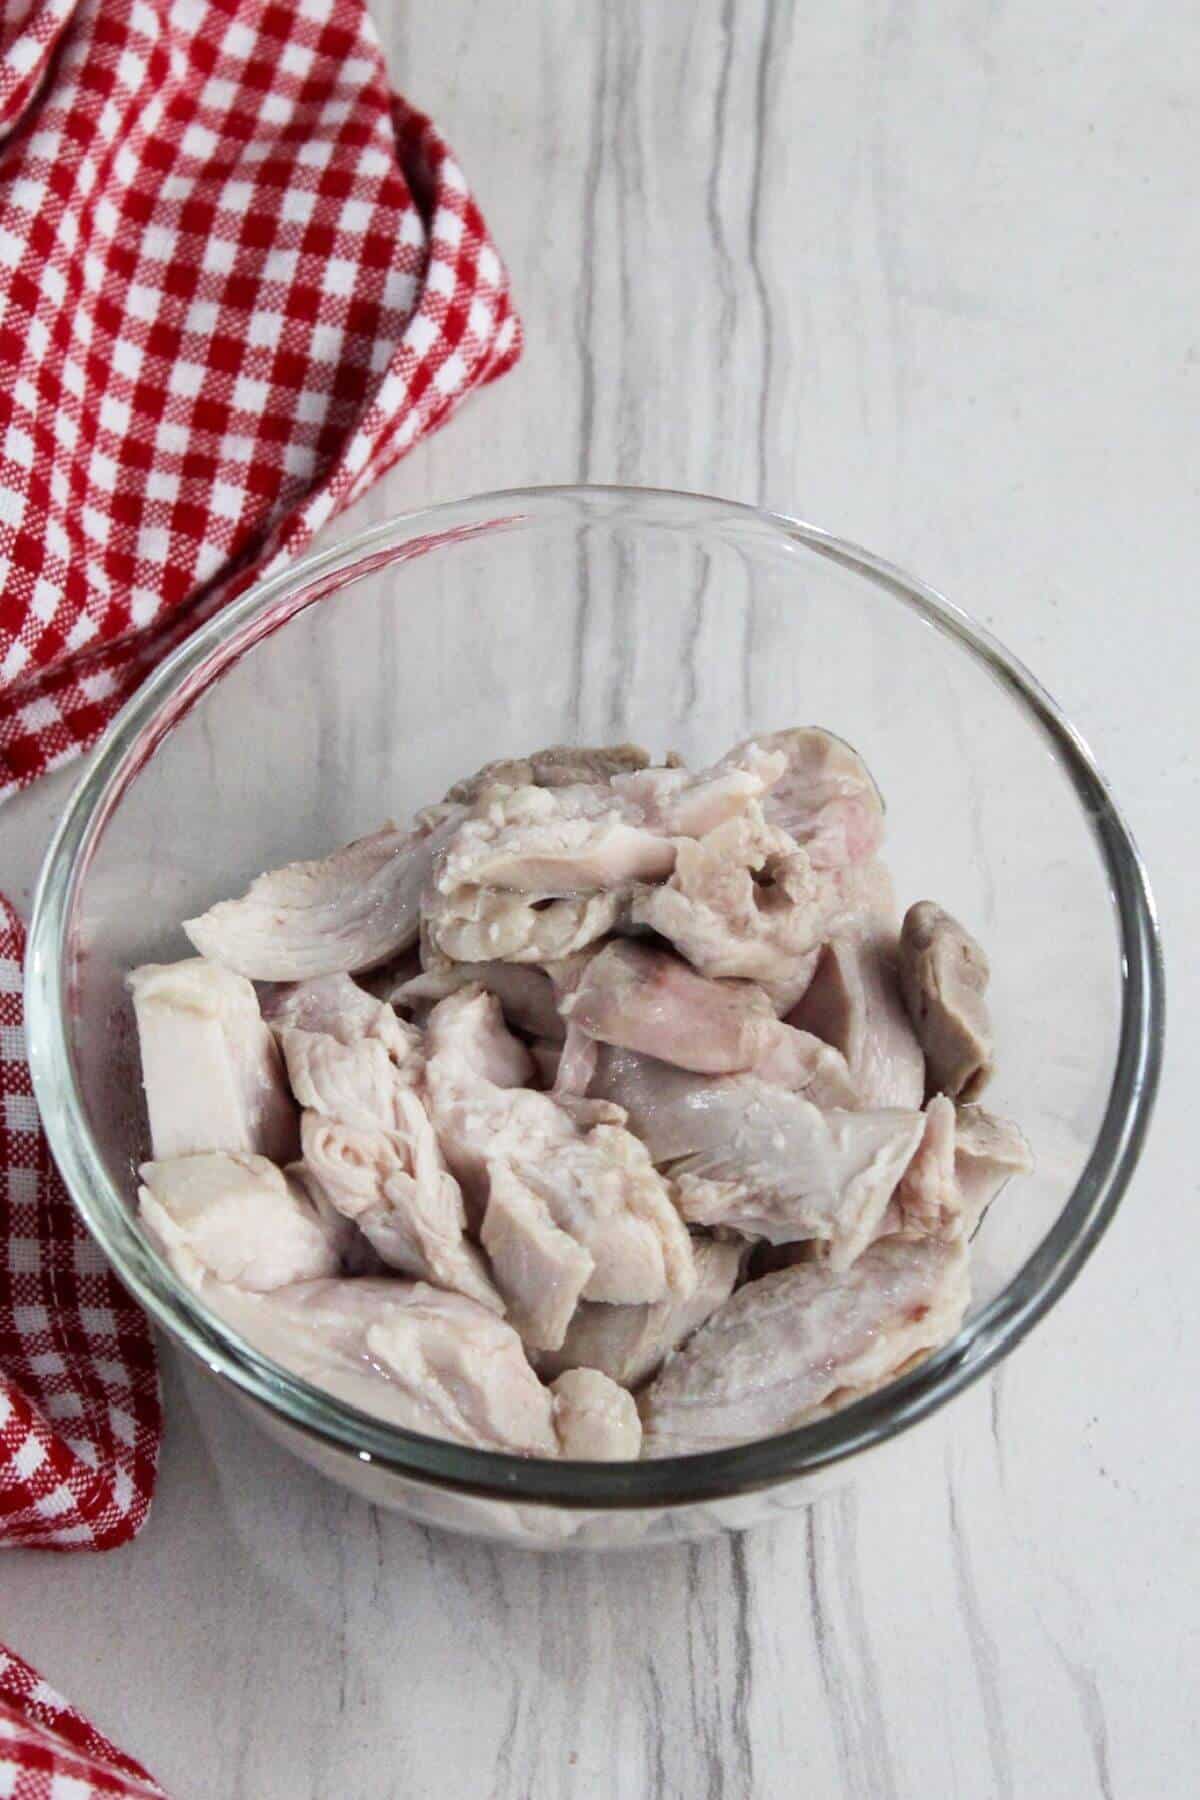 Sliced chicken thighs in a glass bowl.